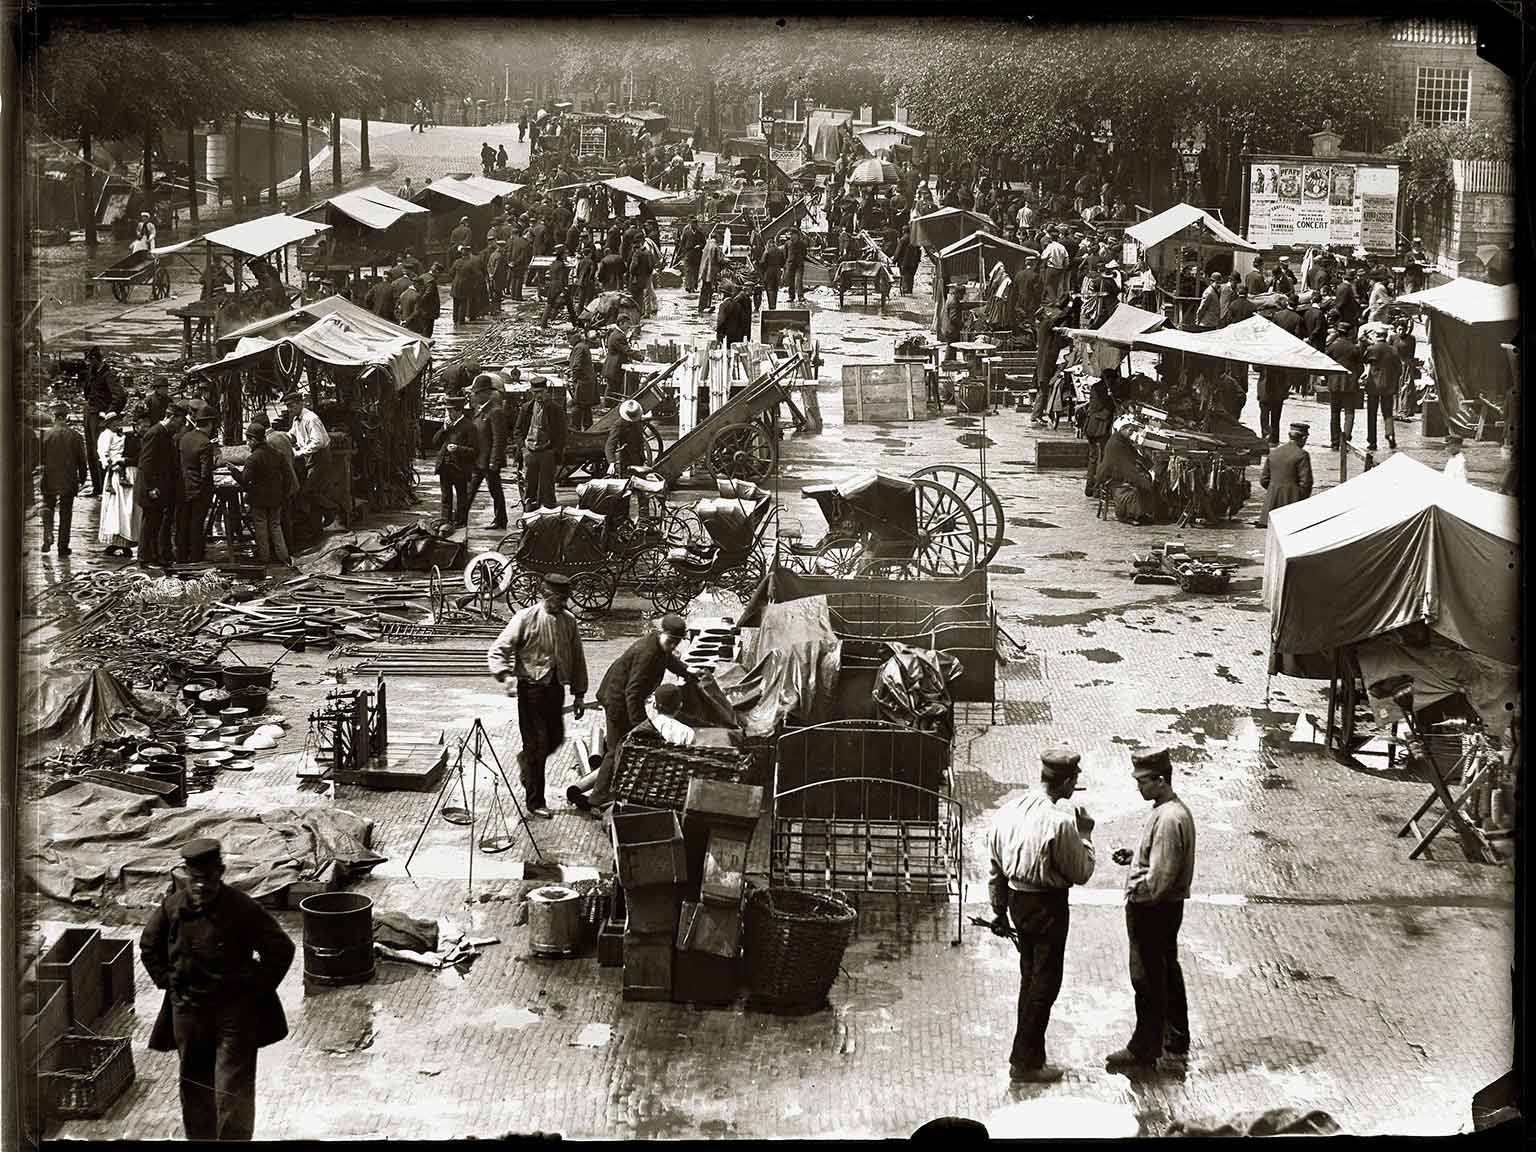 West side of the Amstelveld market in 1891, Amsterdam